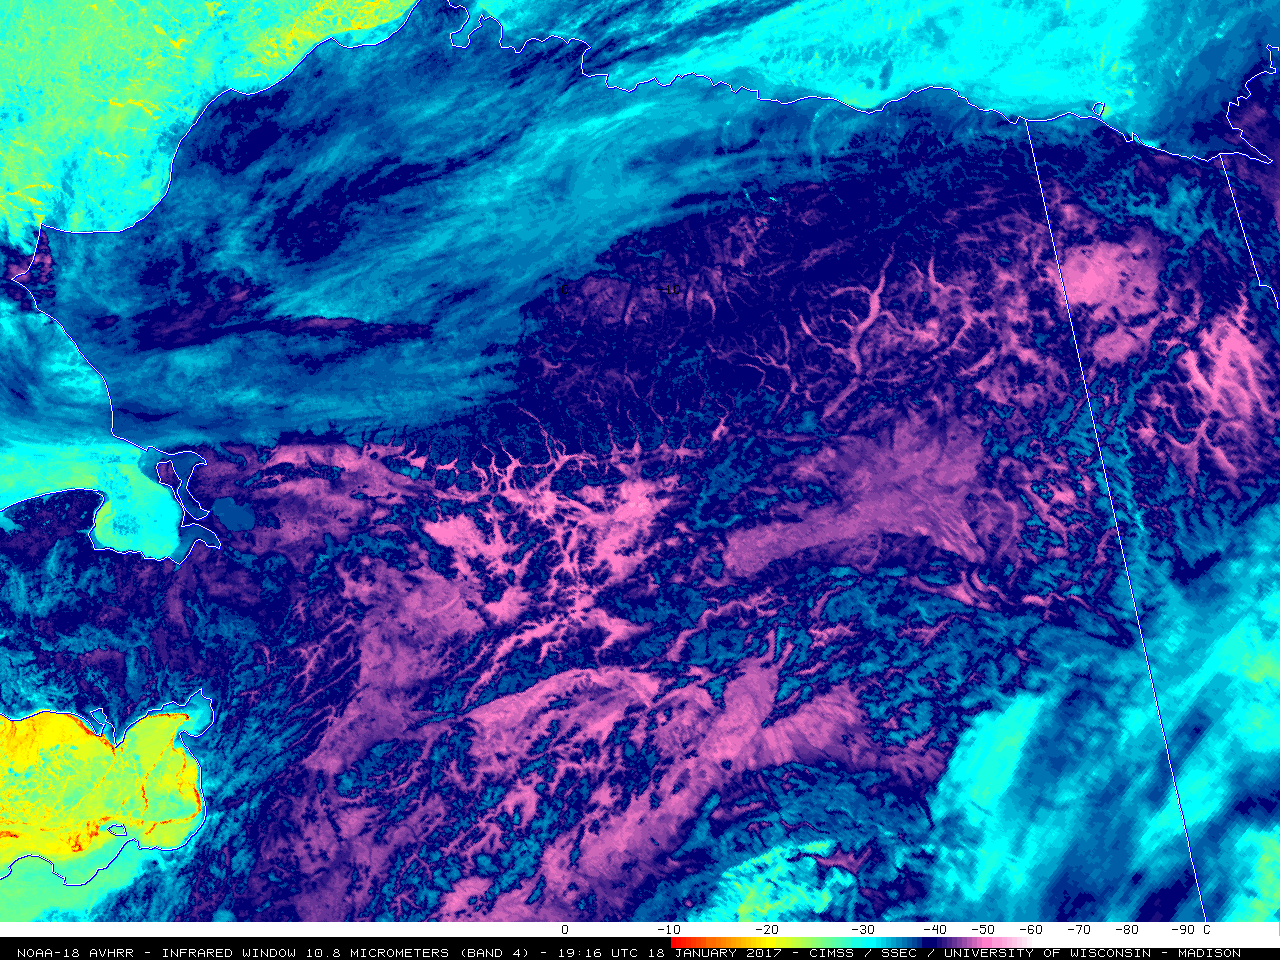 NOAA-18 vs GOES-15 Infrared Window images [click to enlarge]